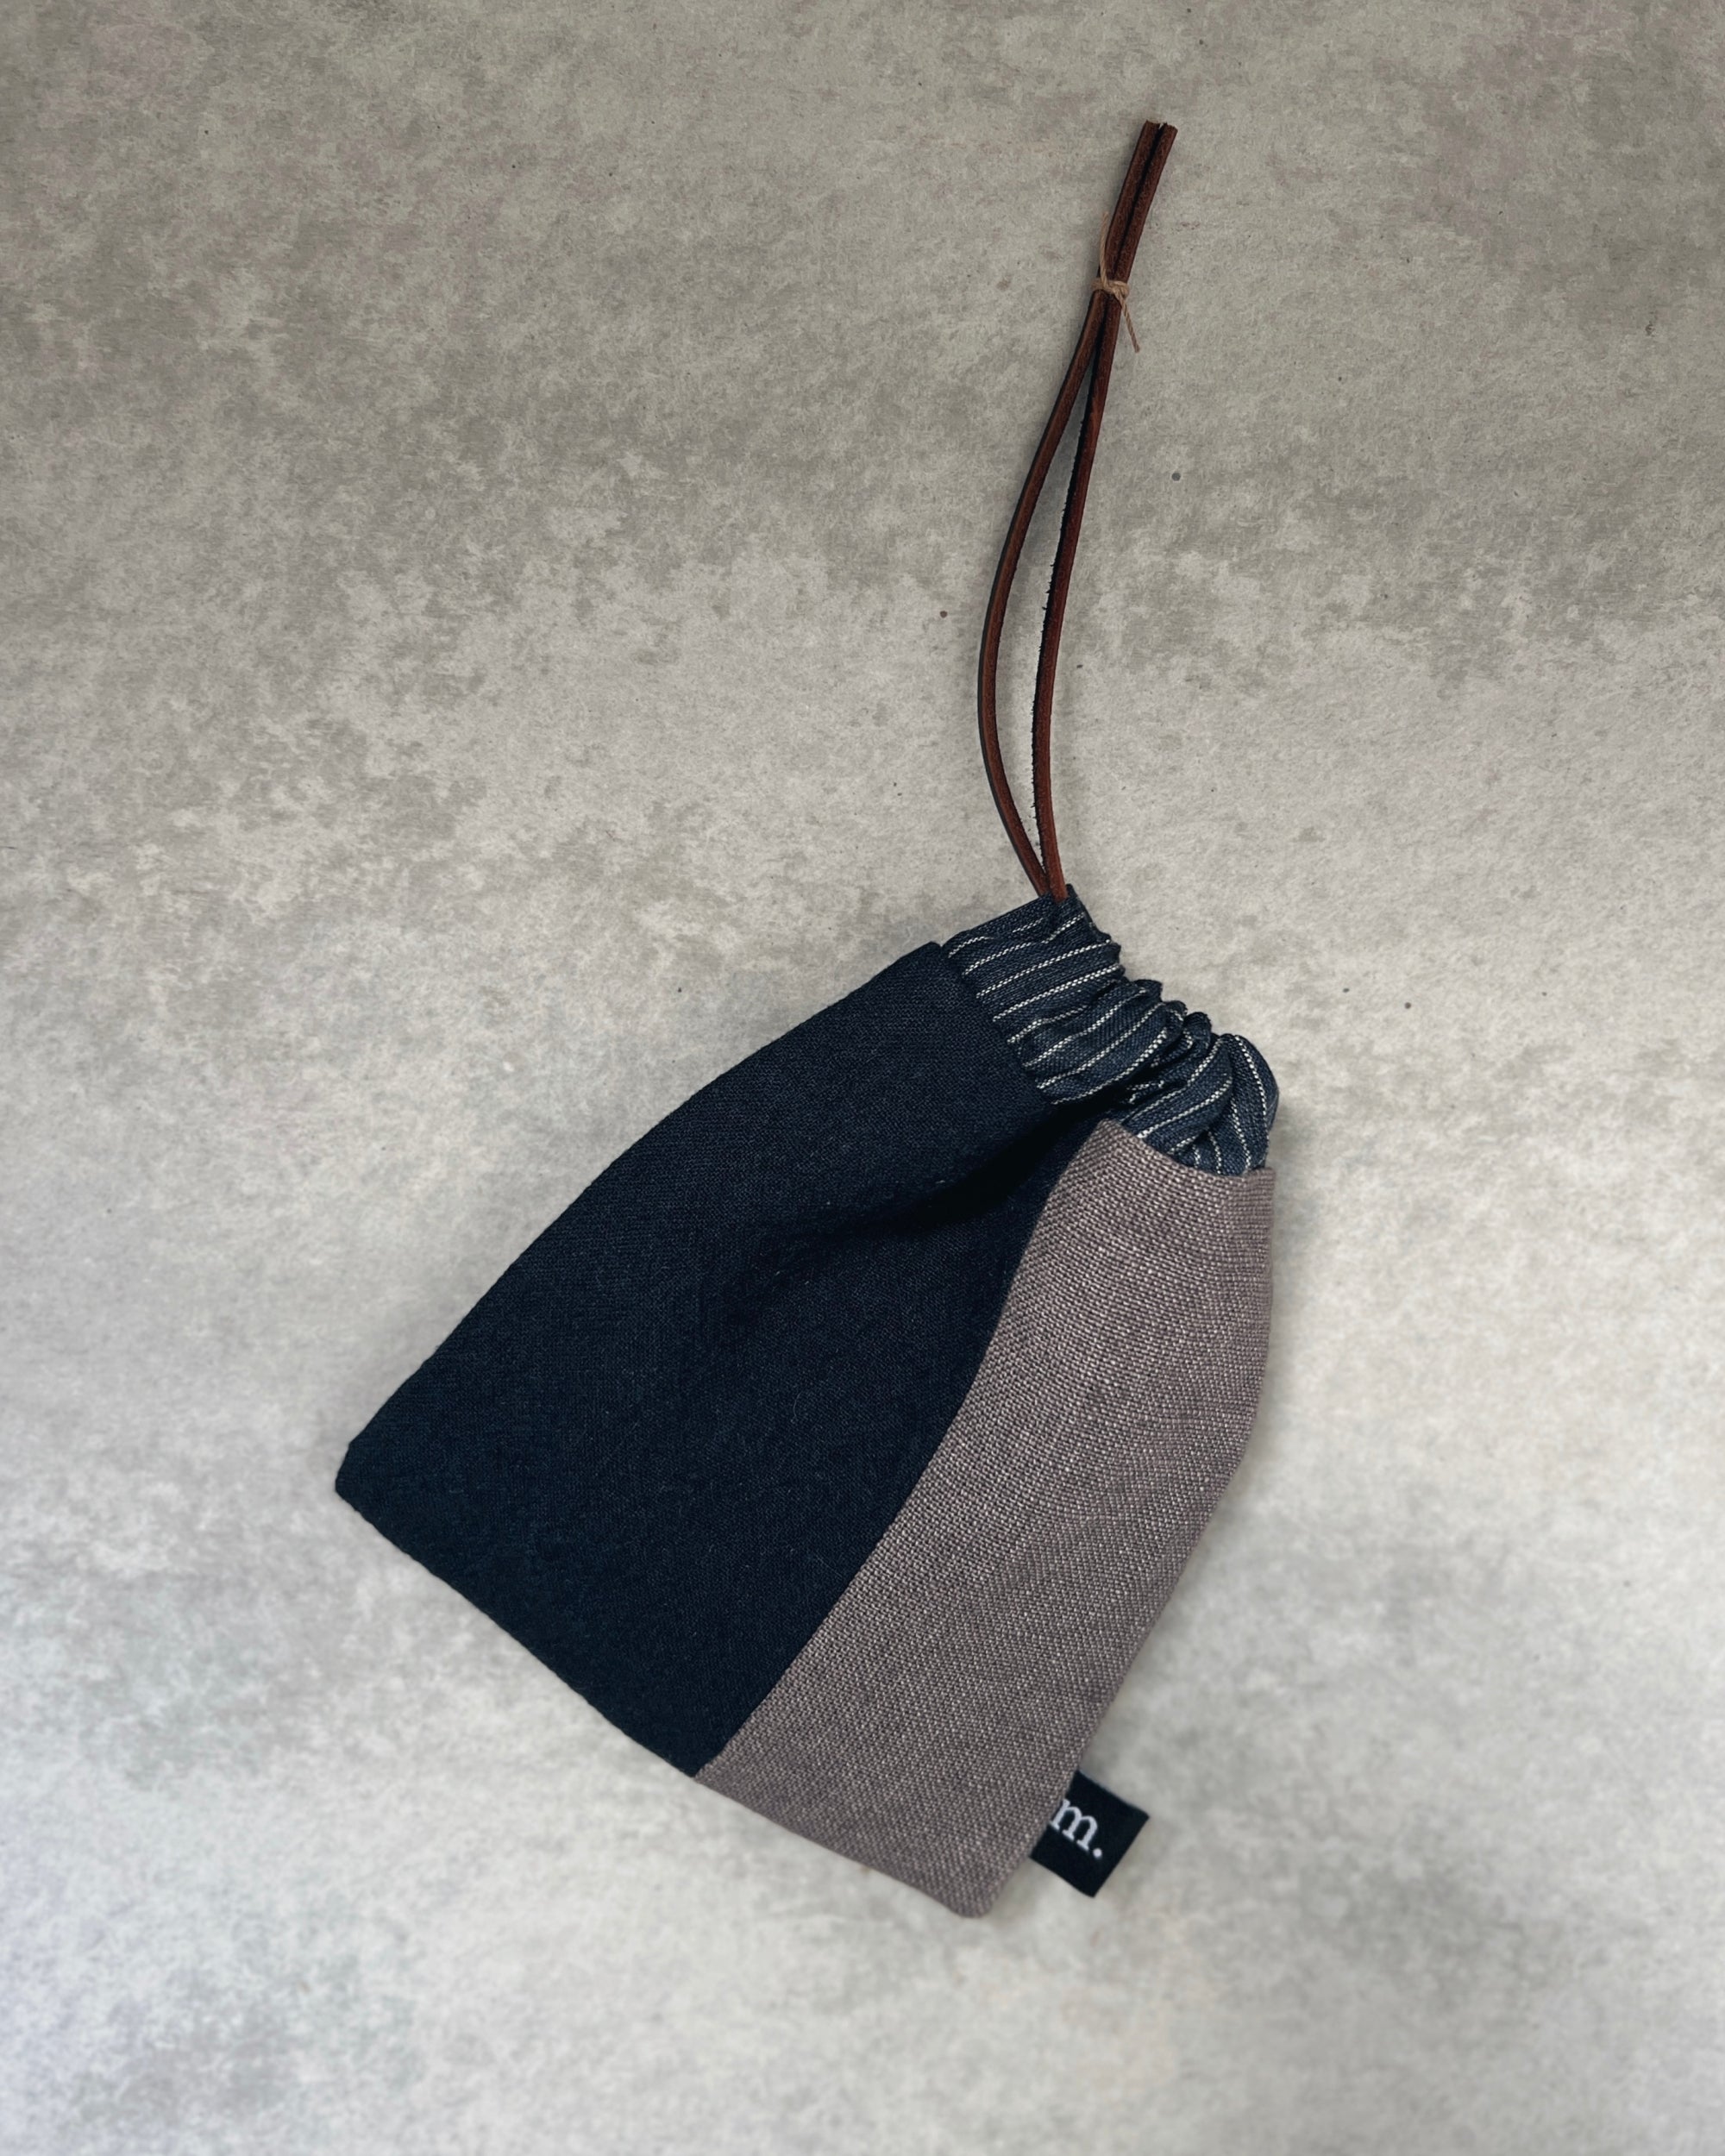 Handmade bag, sewn using Japanese cotton and linen, with a leather drawstring